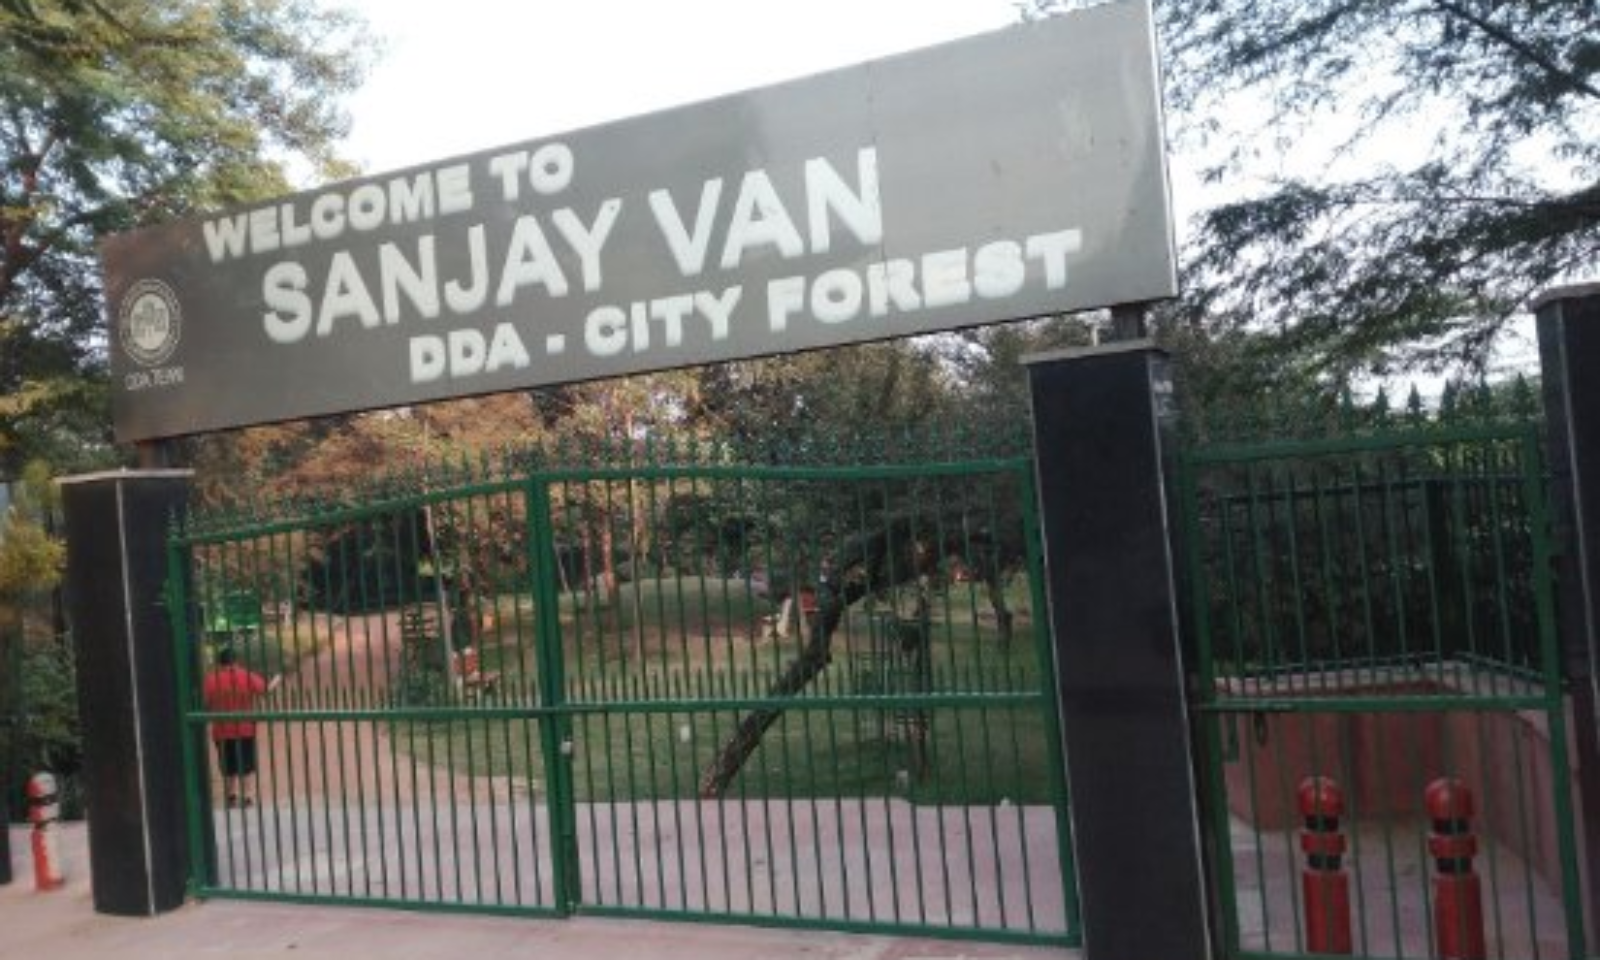 Ensure That There's No Encroachment In Sanjay Van, Delhi HC Directs DDA  After Taking Suo Moto Cognisance [Read Order]